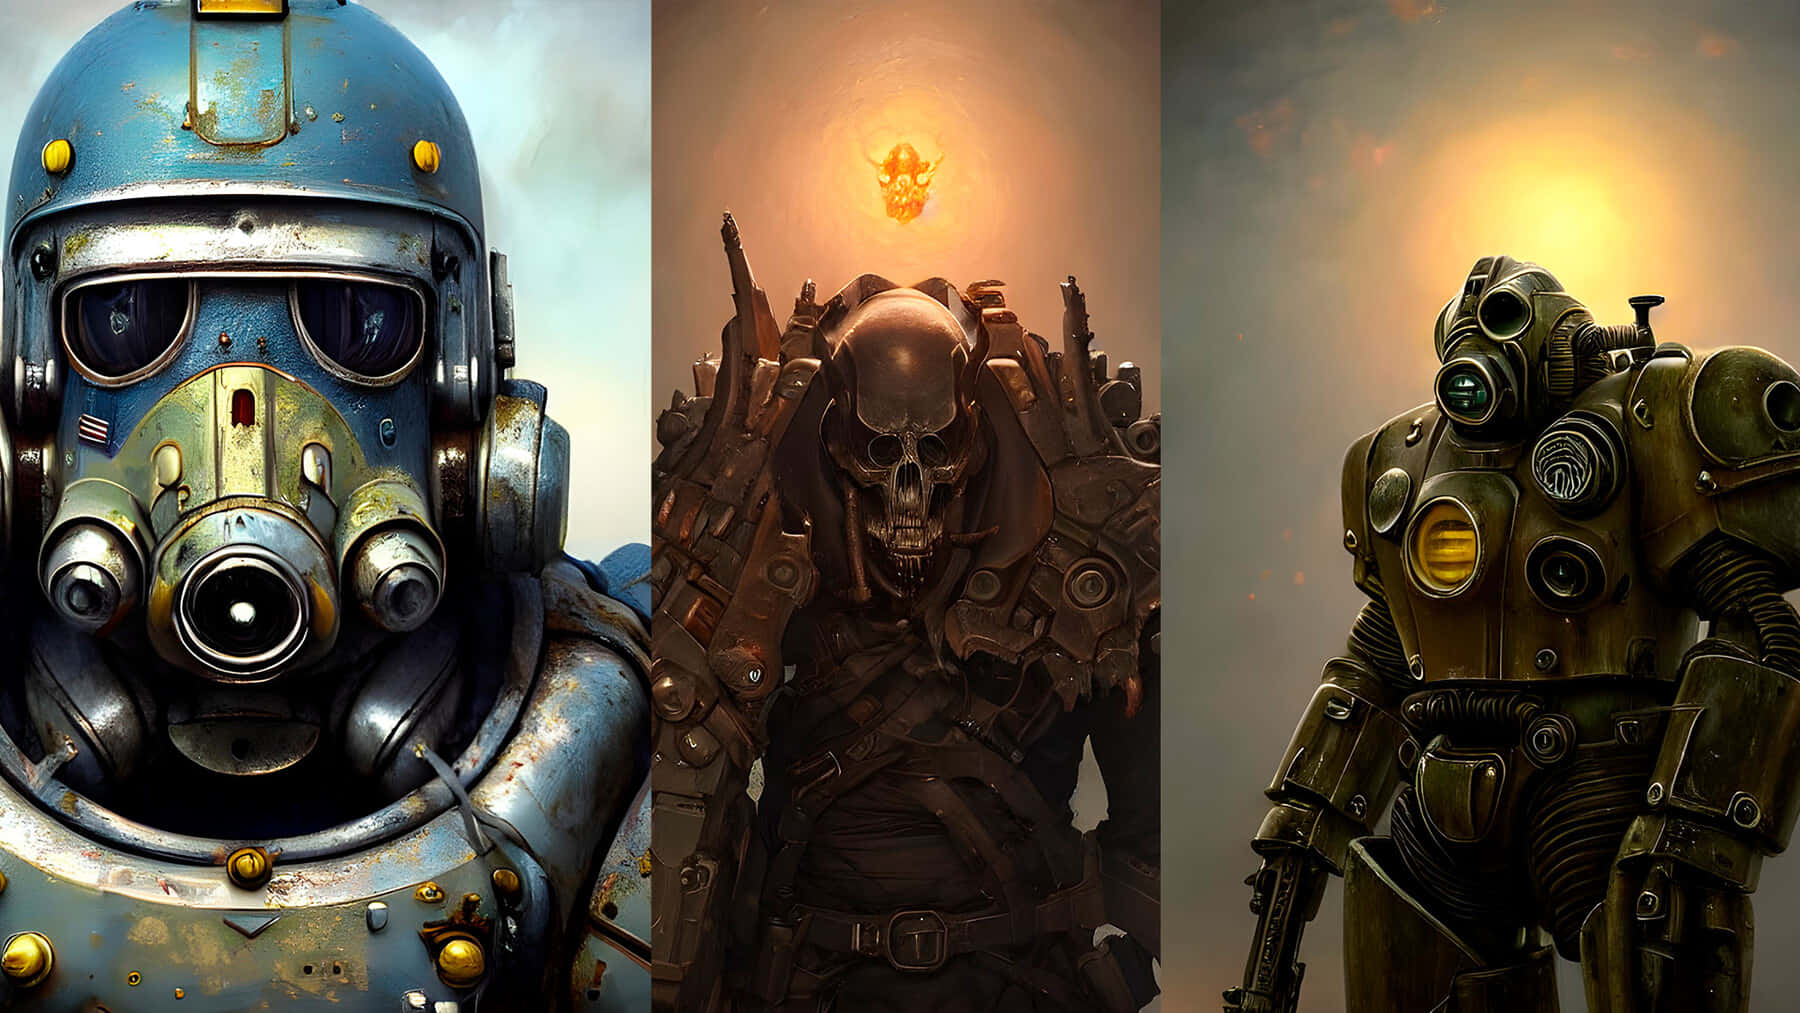 A Powerful Fallout 4 Hero in Advanced Power Armor Wallpaper